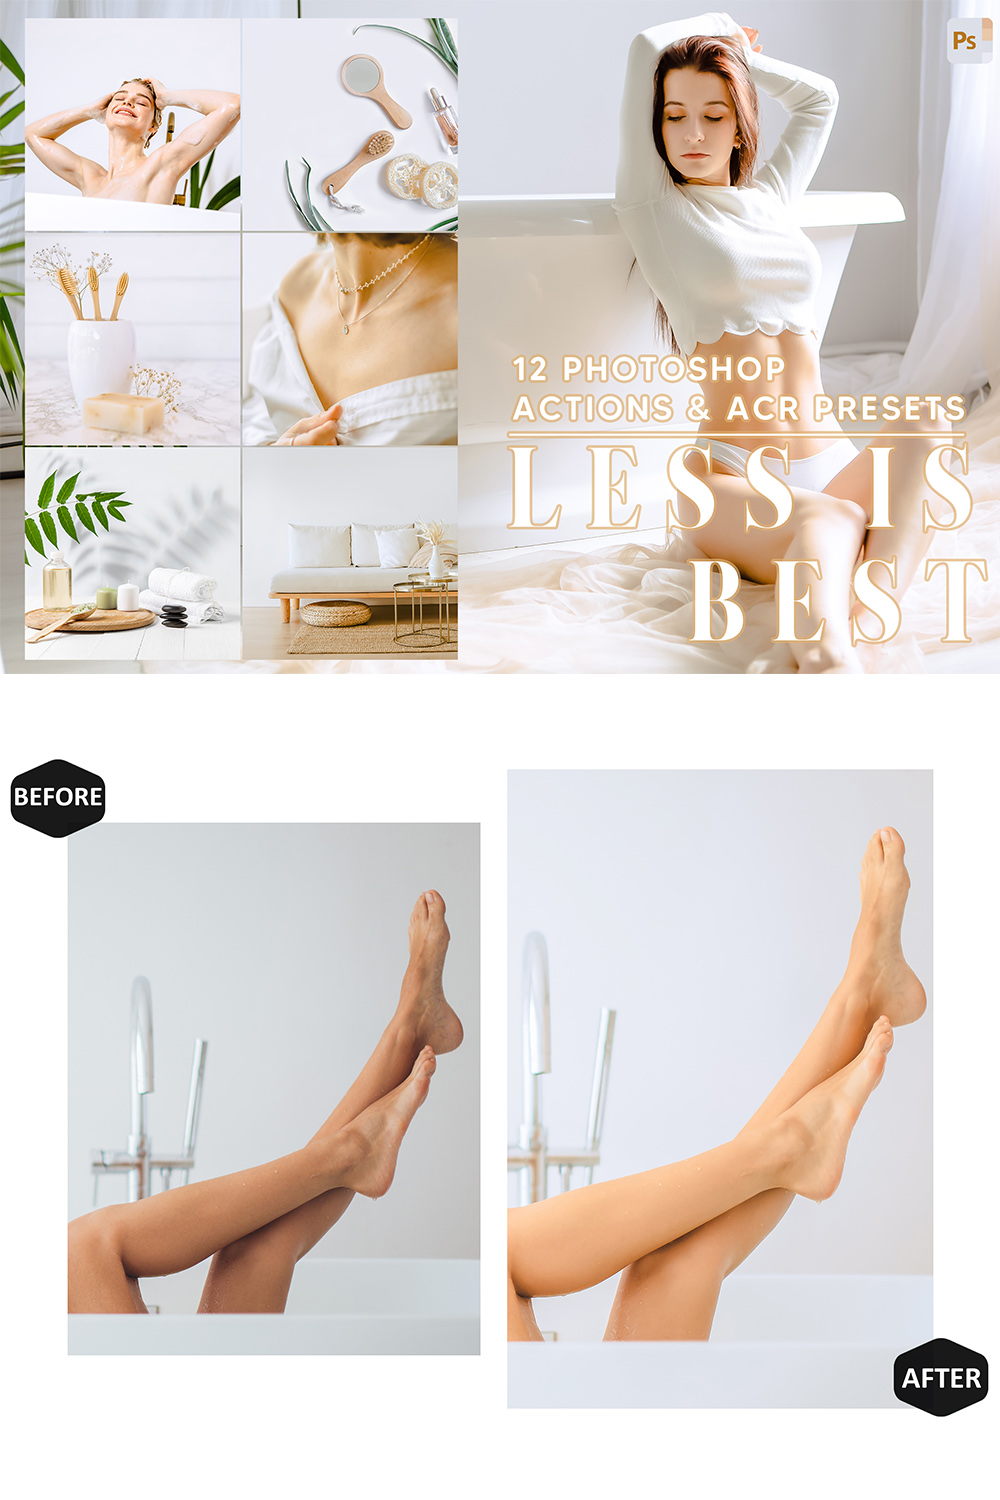 12 Photoshop Actions, Less is Best Ps Action, Minimal ACR Preset, Bright Ps Filter, Portrait And Lifestyle Theme For Instagram, Blogger pinterest preview image.